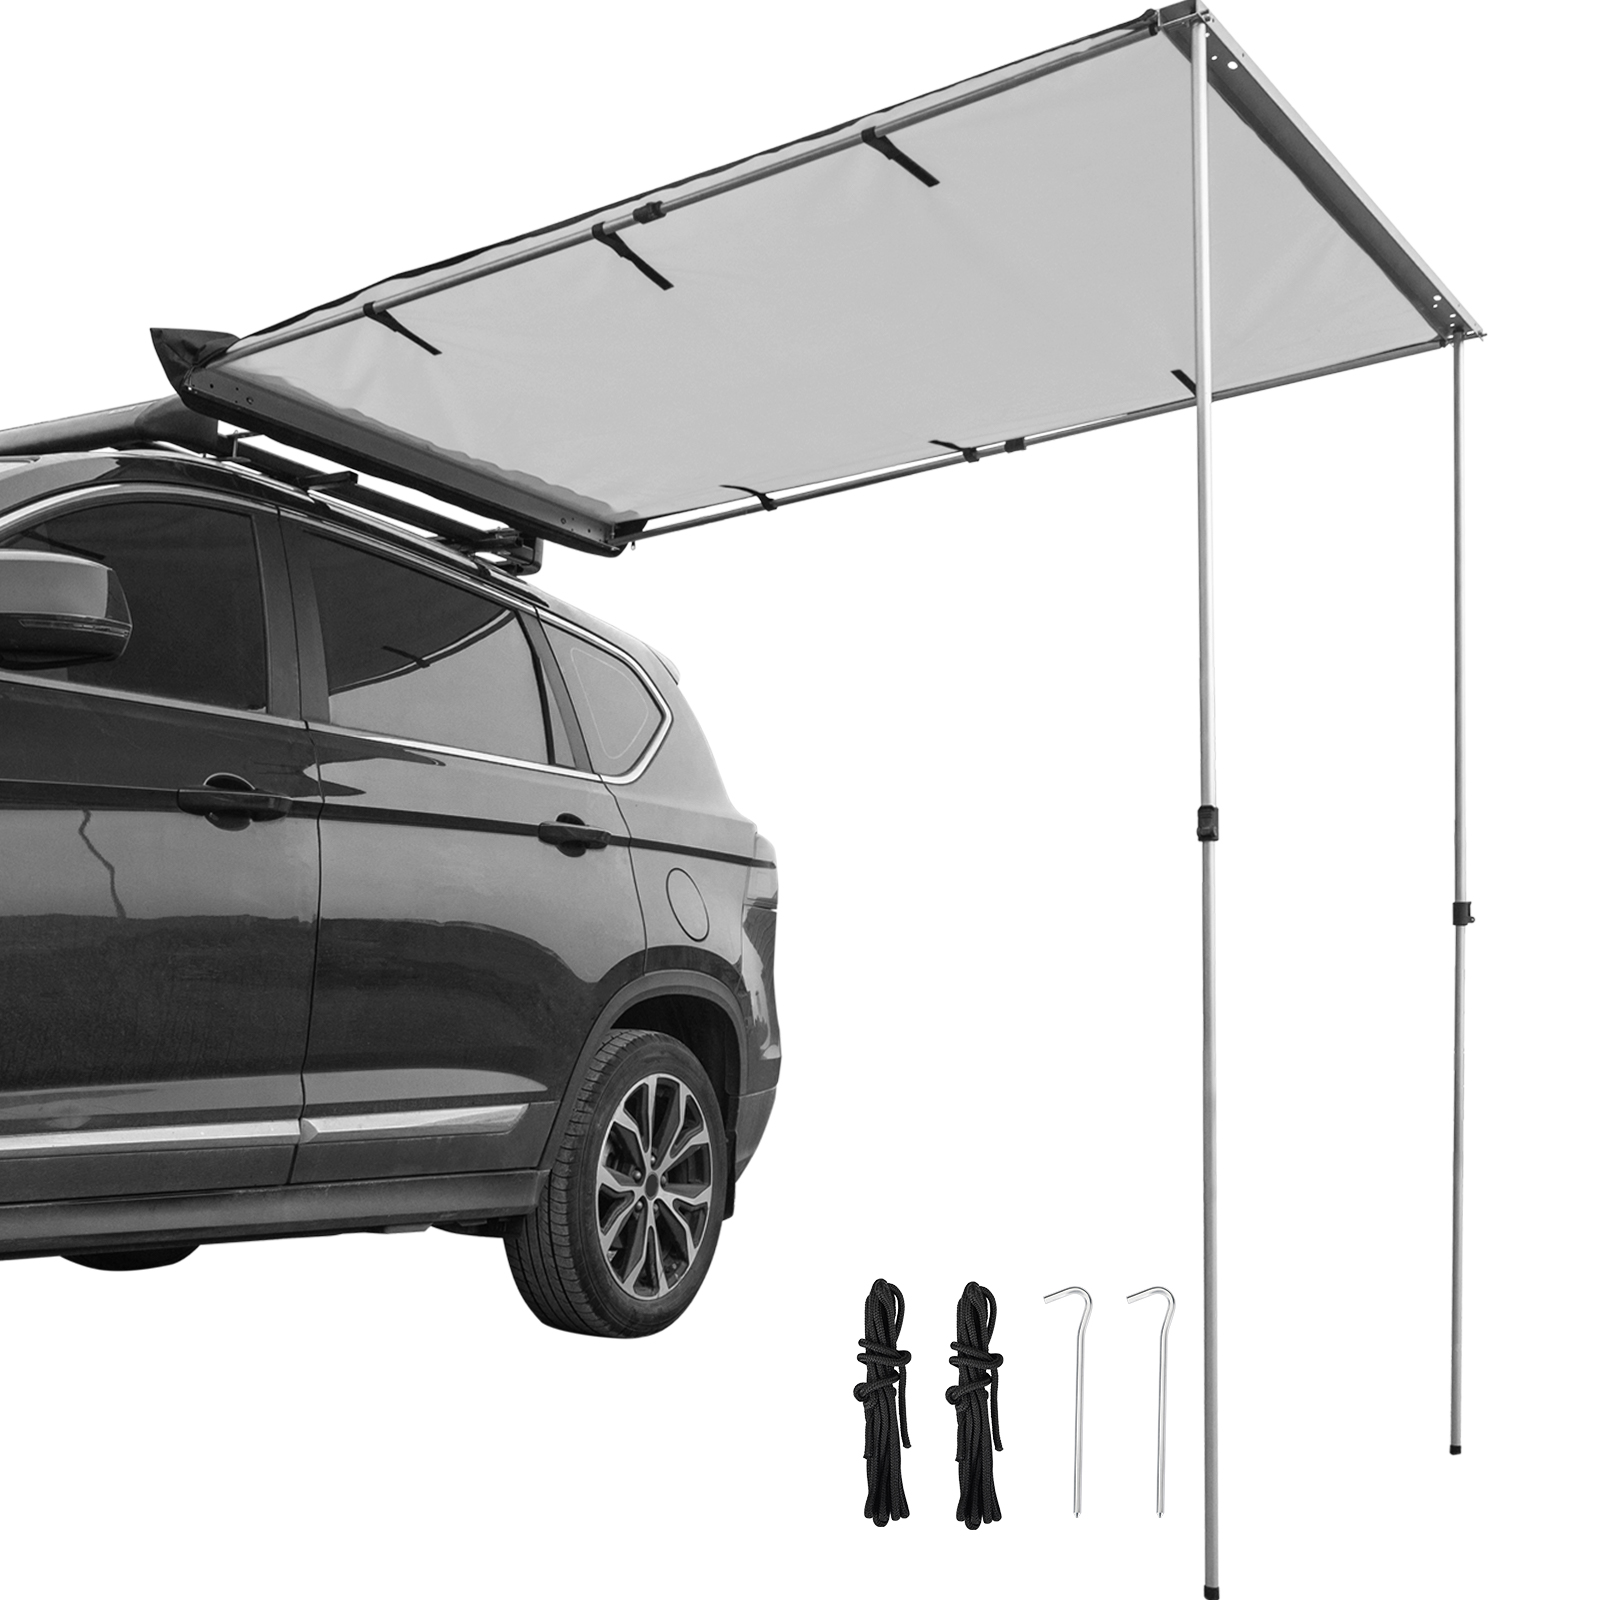 VEVOR Car Awning Car Tent Retractable Waterproof SUV Rooftop Grey 6.5'x8.2' от Vevor Many GEOs